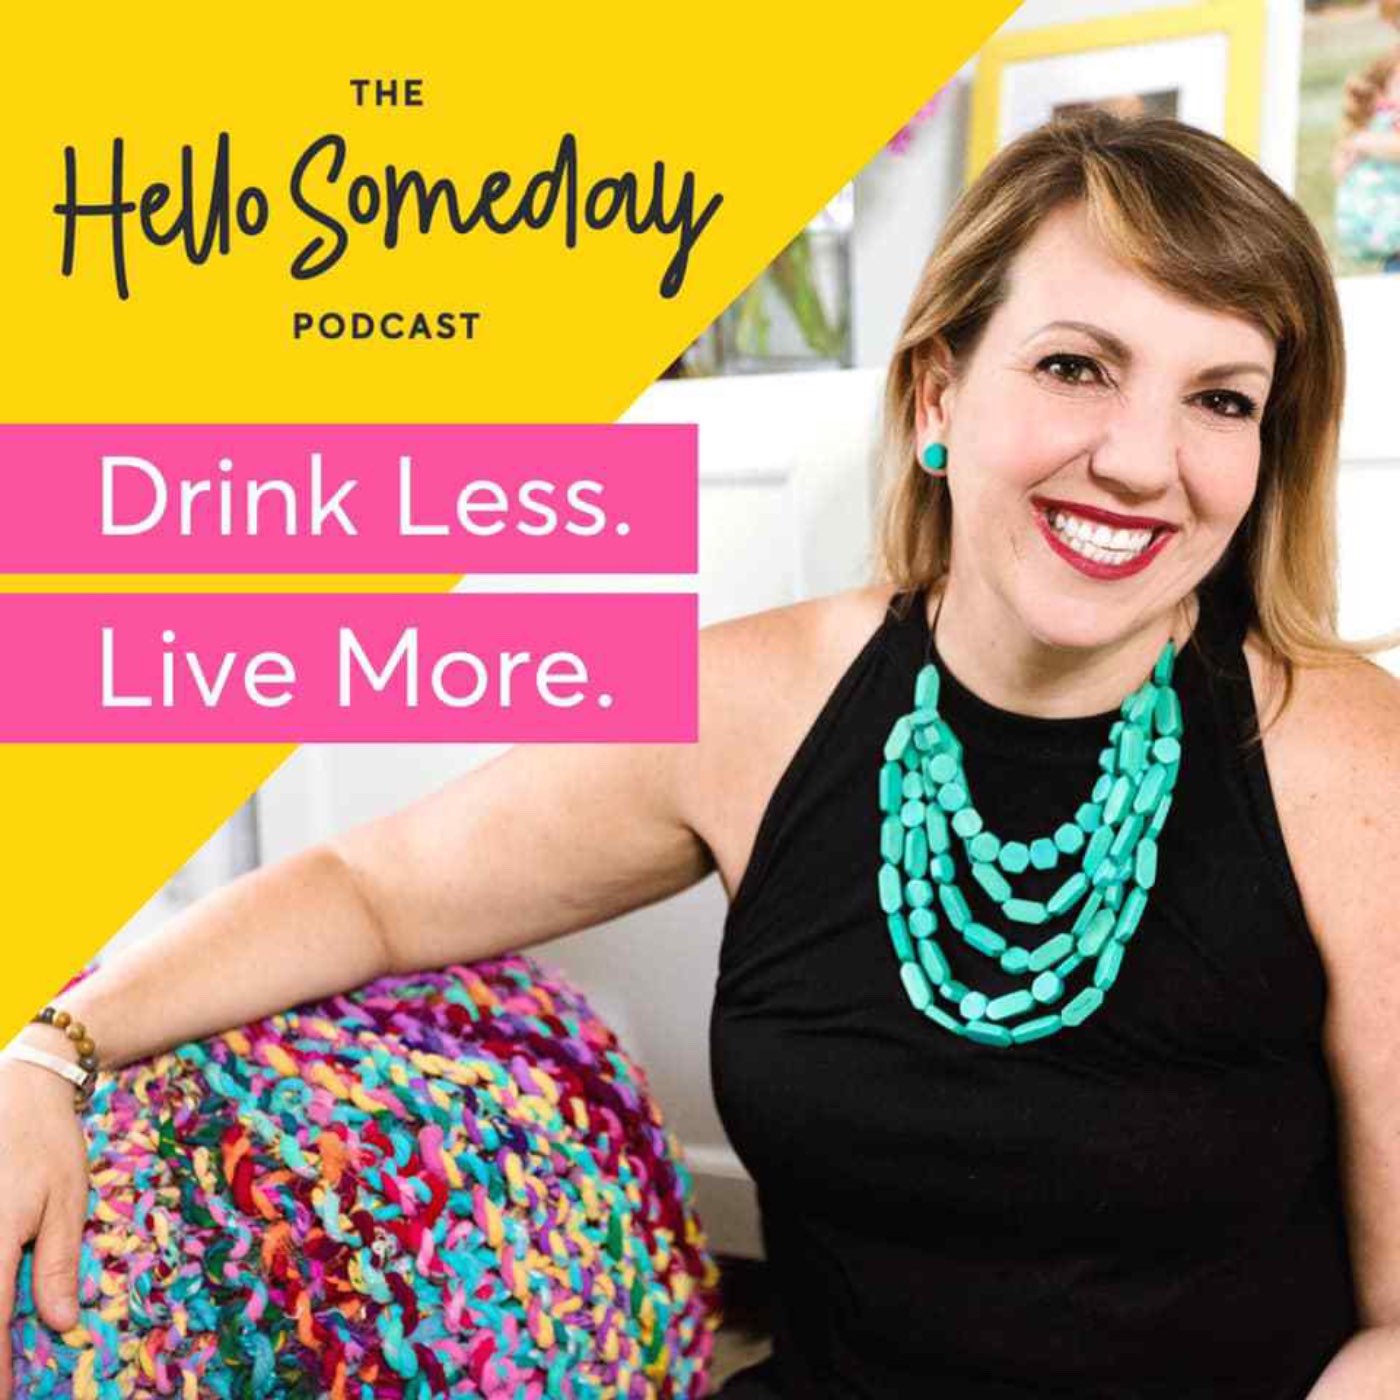 Www Xxx Com17 - hello-someday-podcast-art-drink-less-live-more-for-busy-women-2-1.jpg